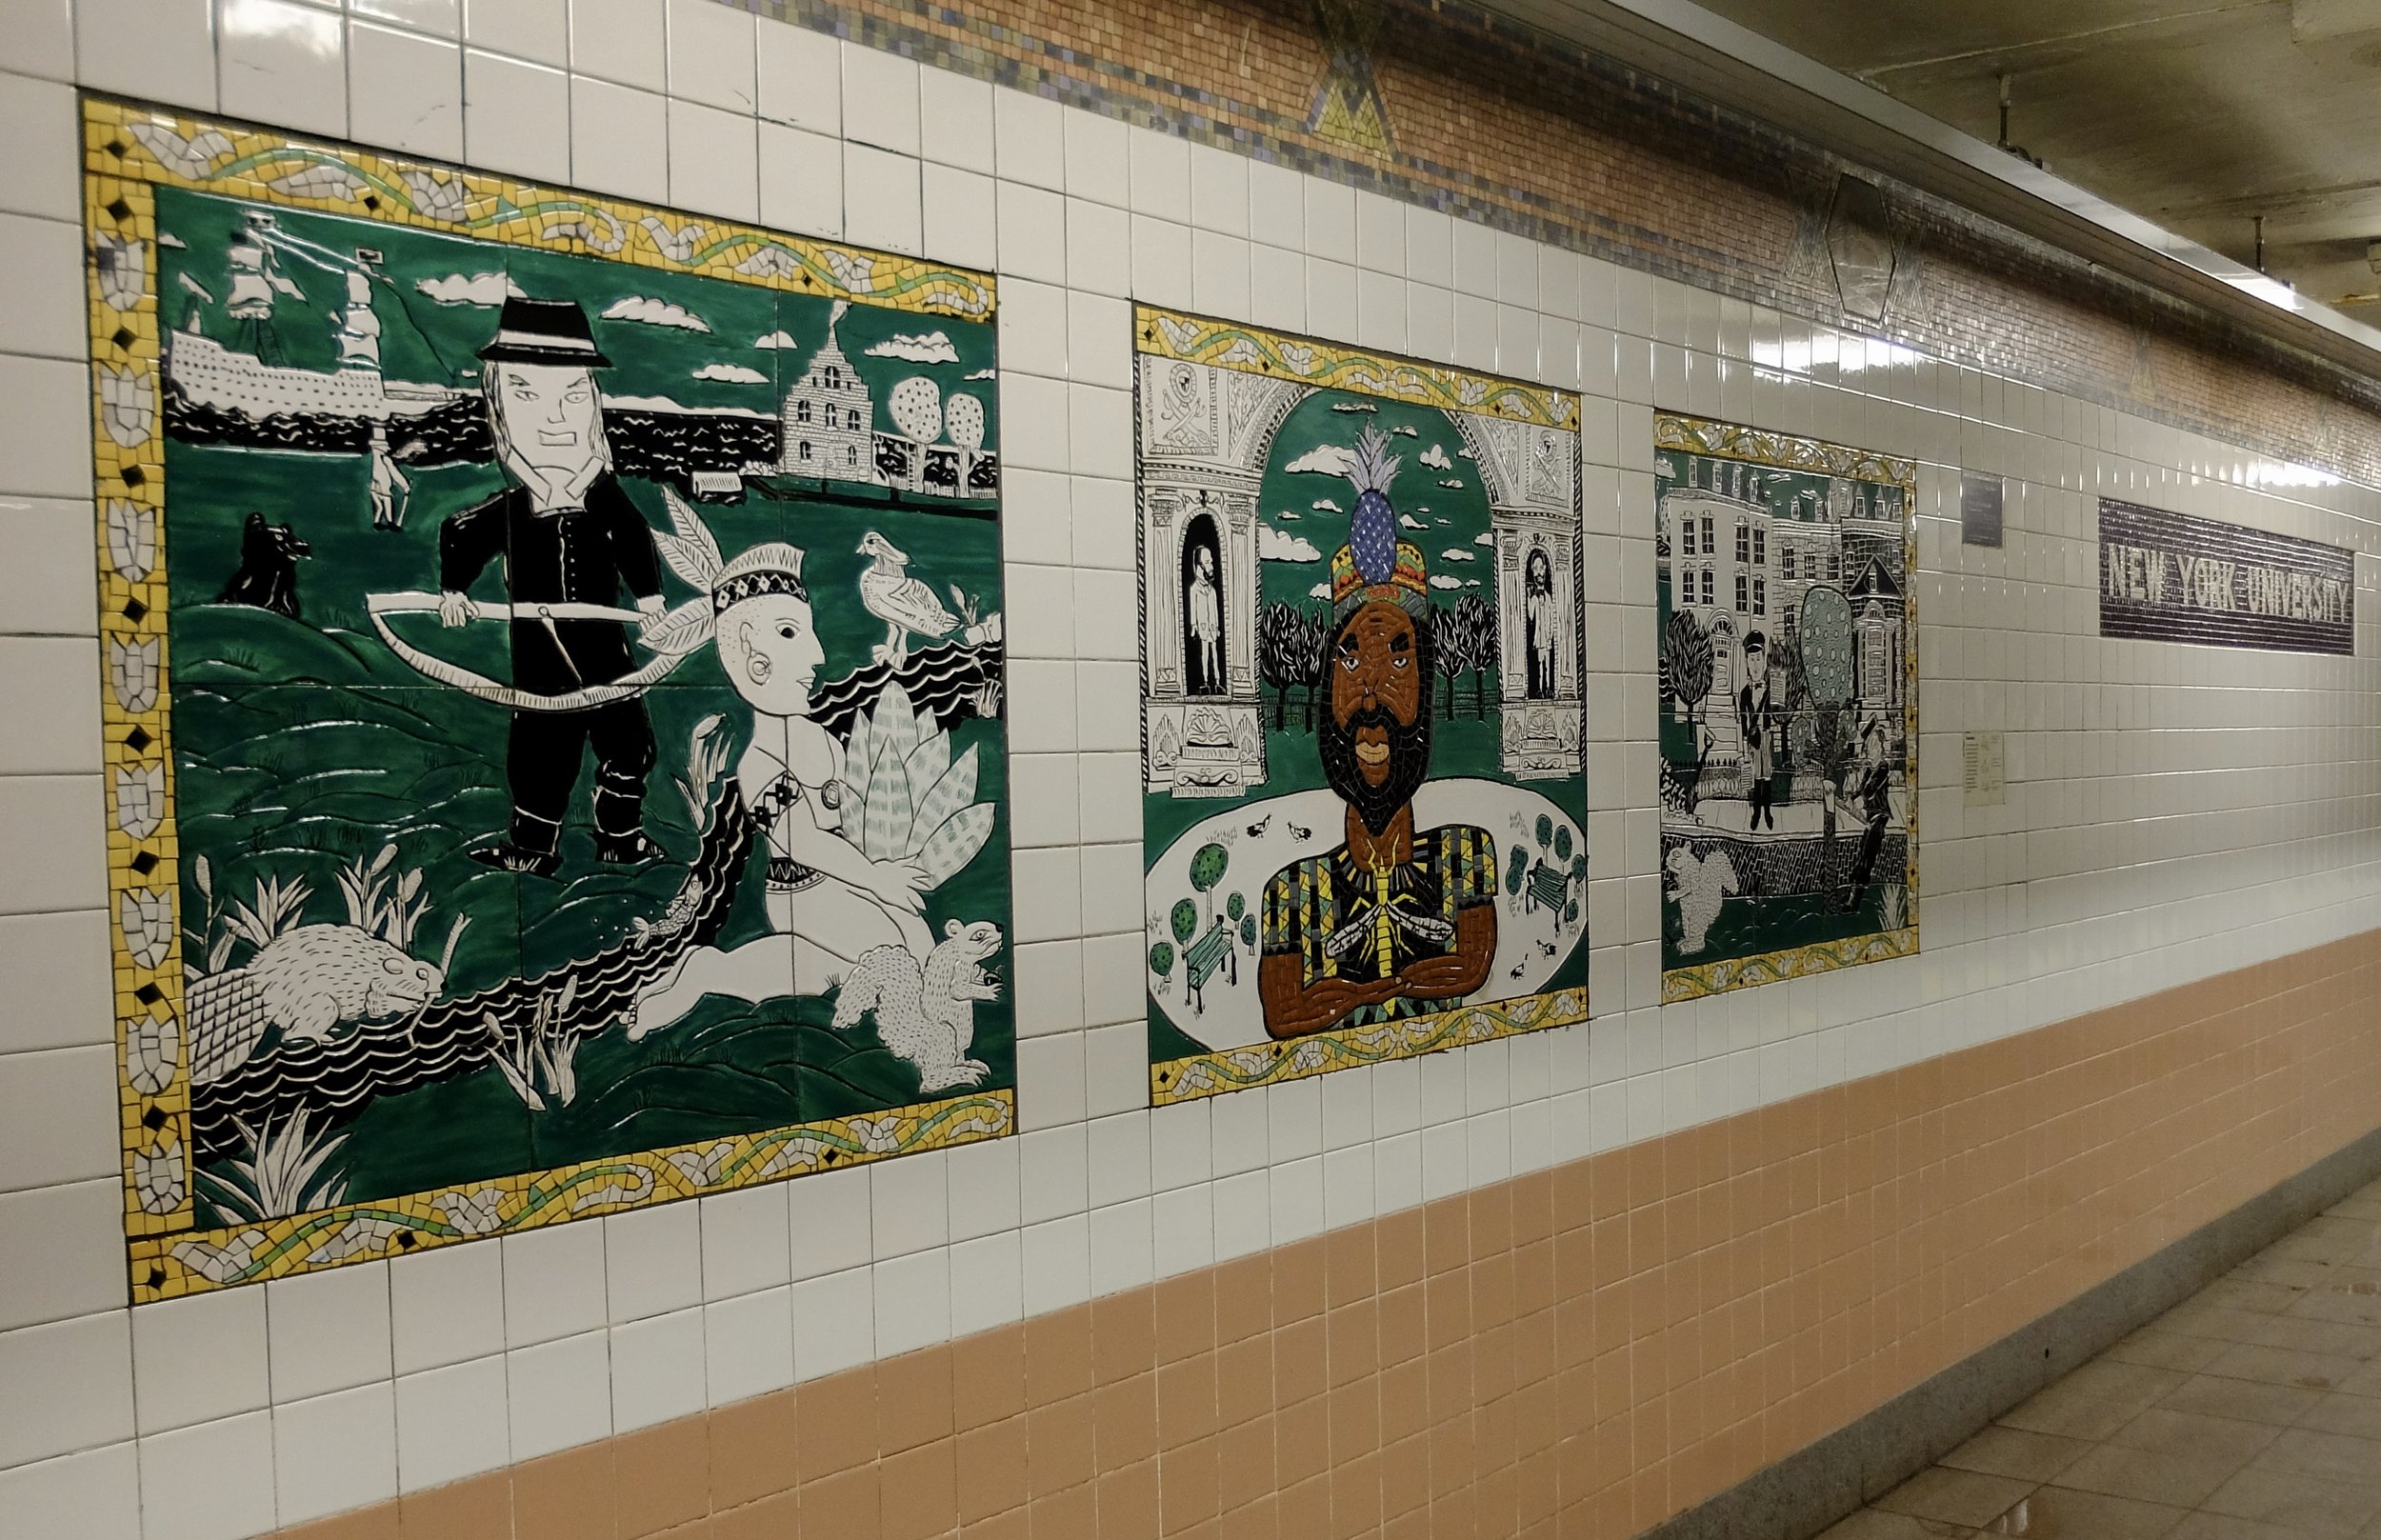  Visit to Greenwich Village -  Lee Brozgold &amp; Students of P.S. 41  "The Greenwich Village Murals"  1994  Mosaic and ceramic tiles 